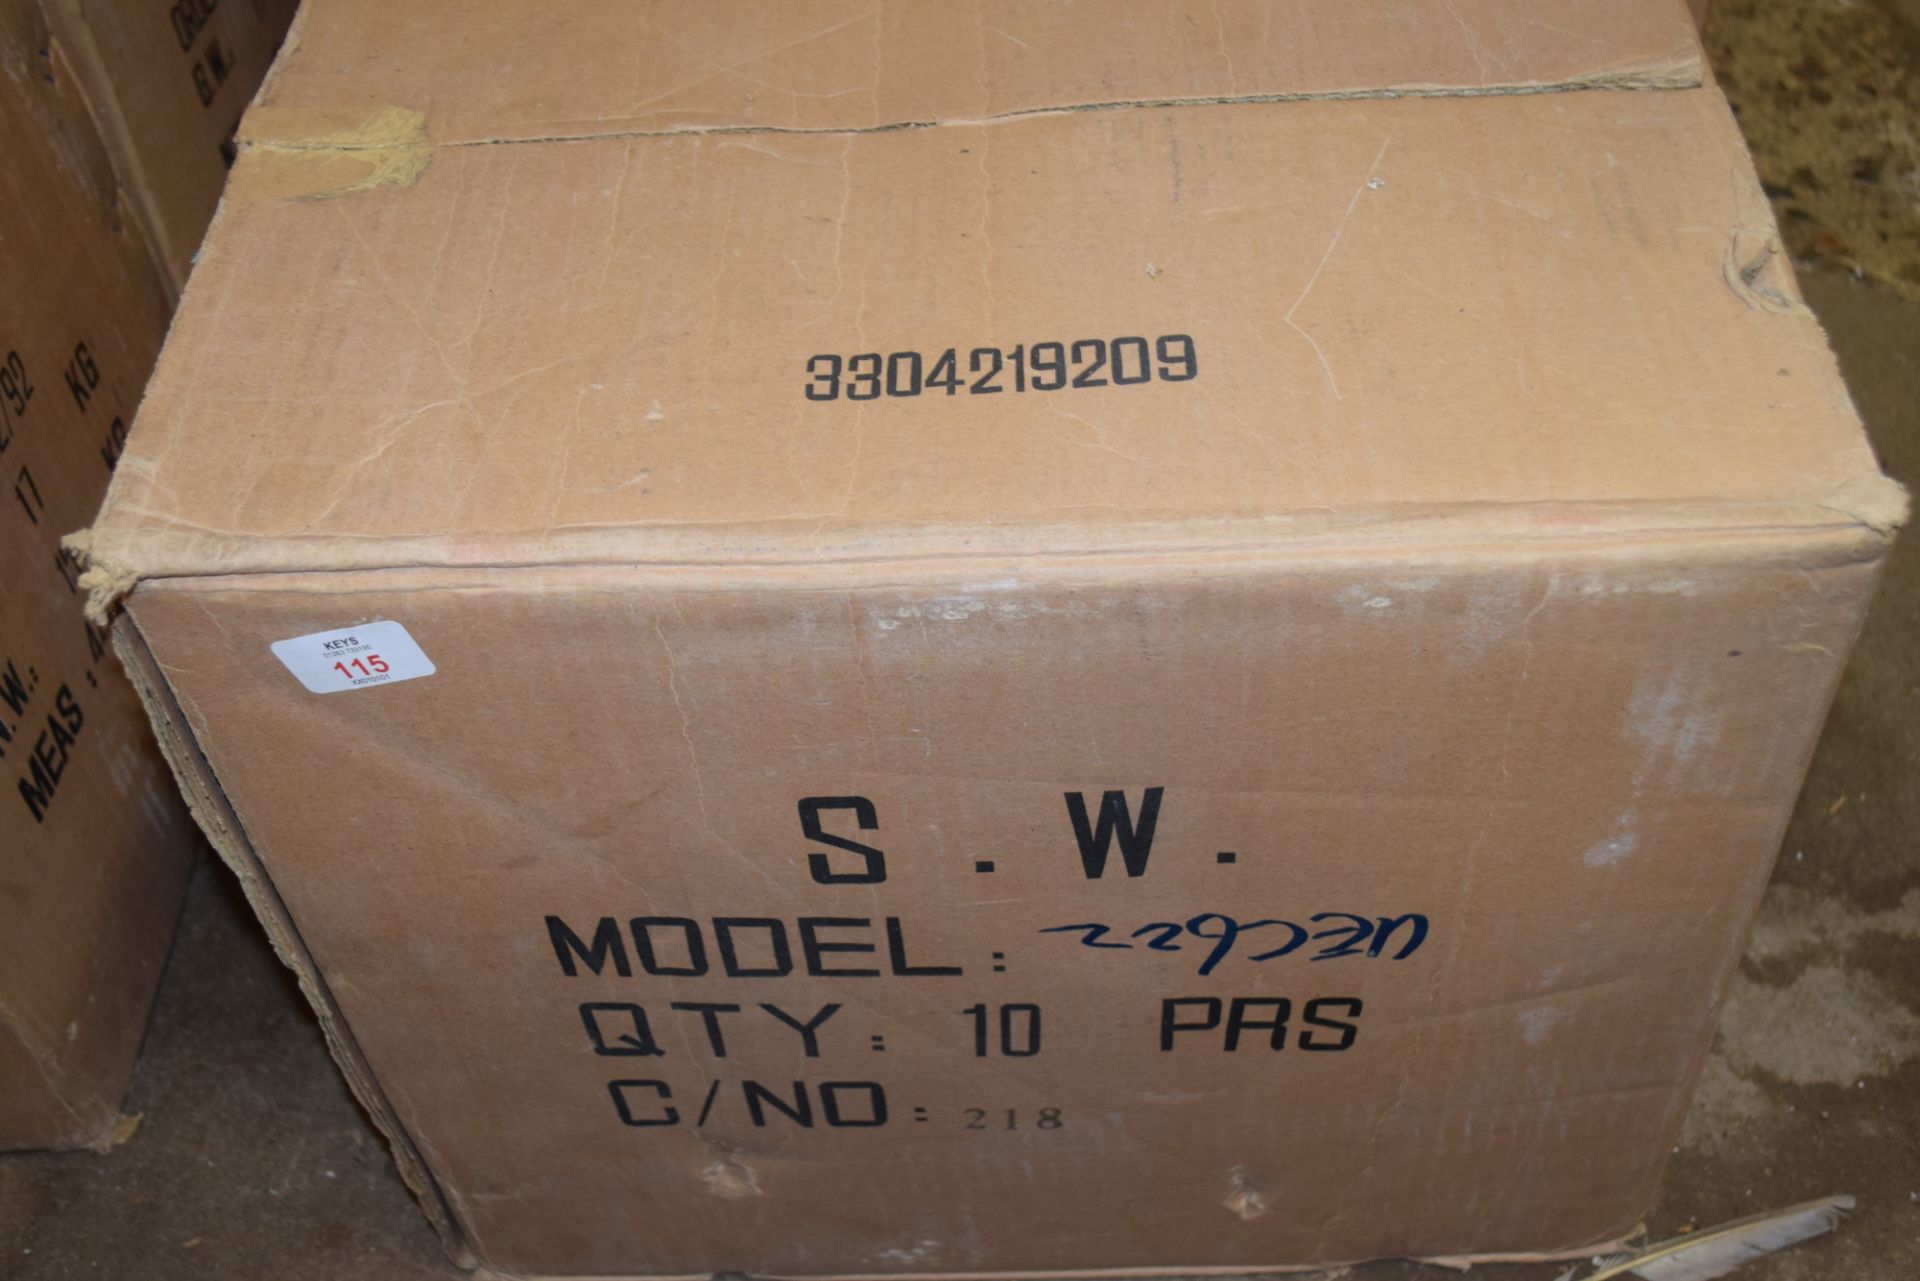 BOX CONTAINING 10 PAIRS OF HI TECH STEREO CAR SPEAKERS, MODEL NO 2C160, SIZE 6 1/2 INCH, POWER - Image 3 of 4